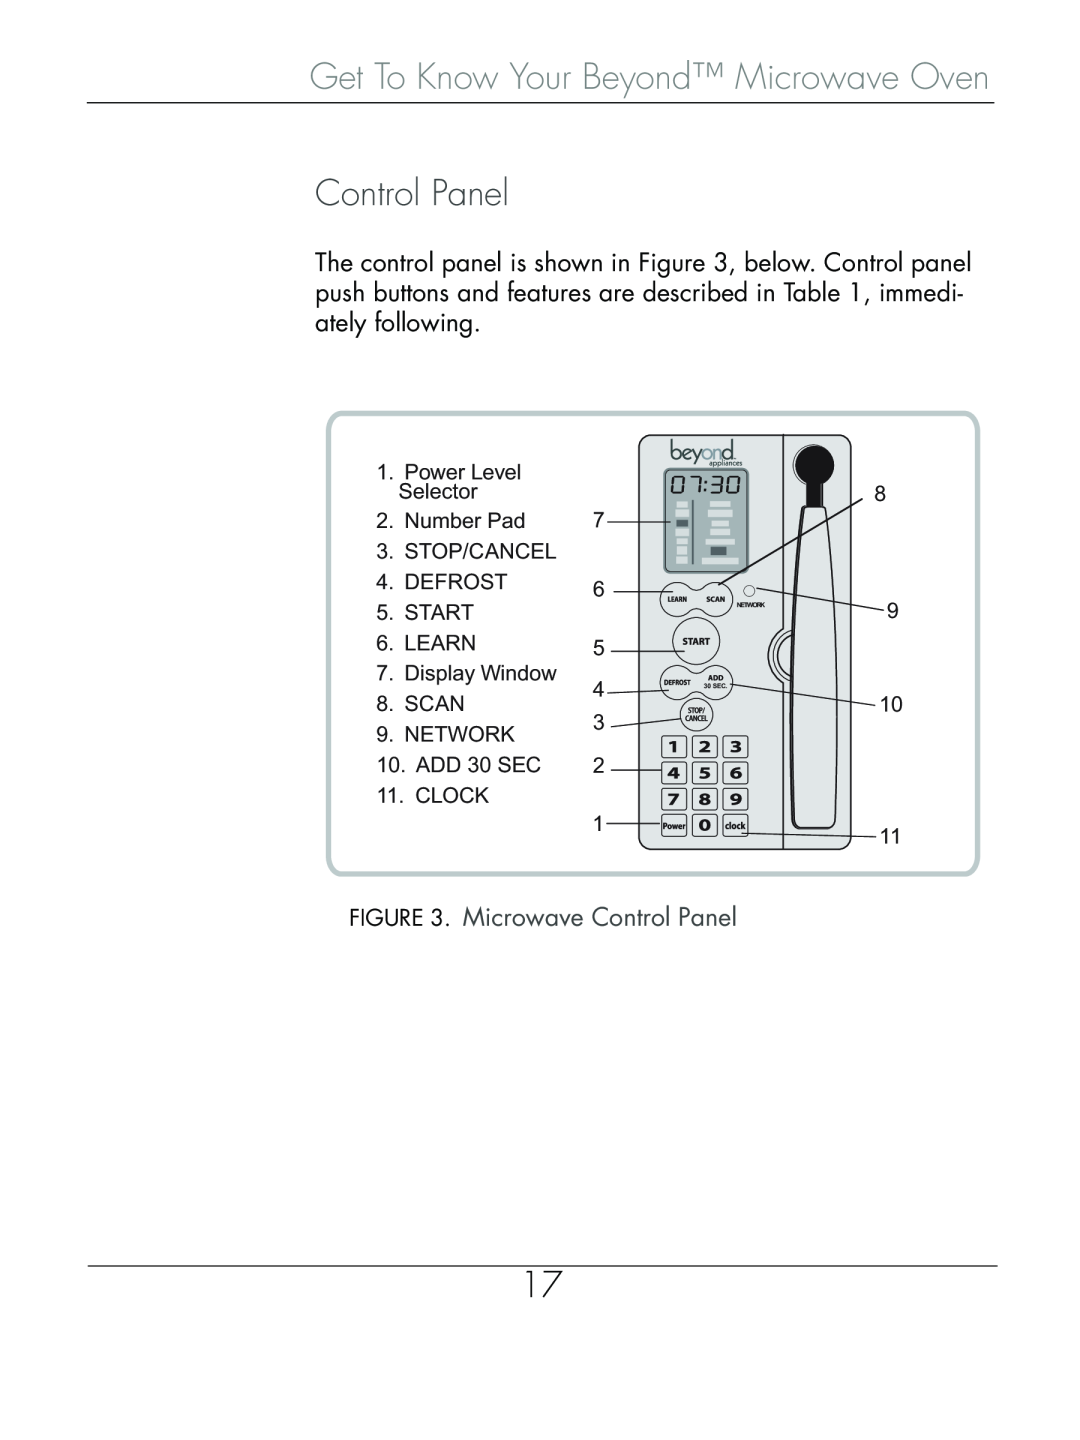 Beyond Microwace Oven manual Get To Know Your Beyond Microwave Oven, Microwave Control Panel 